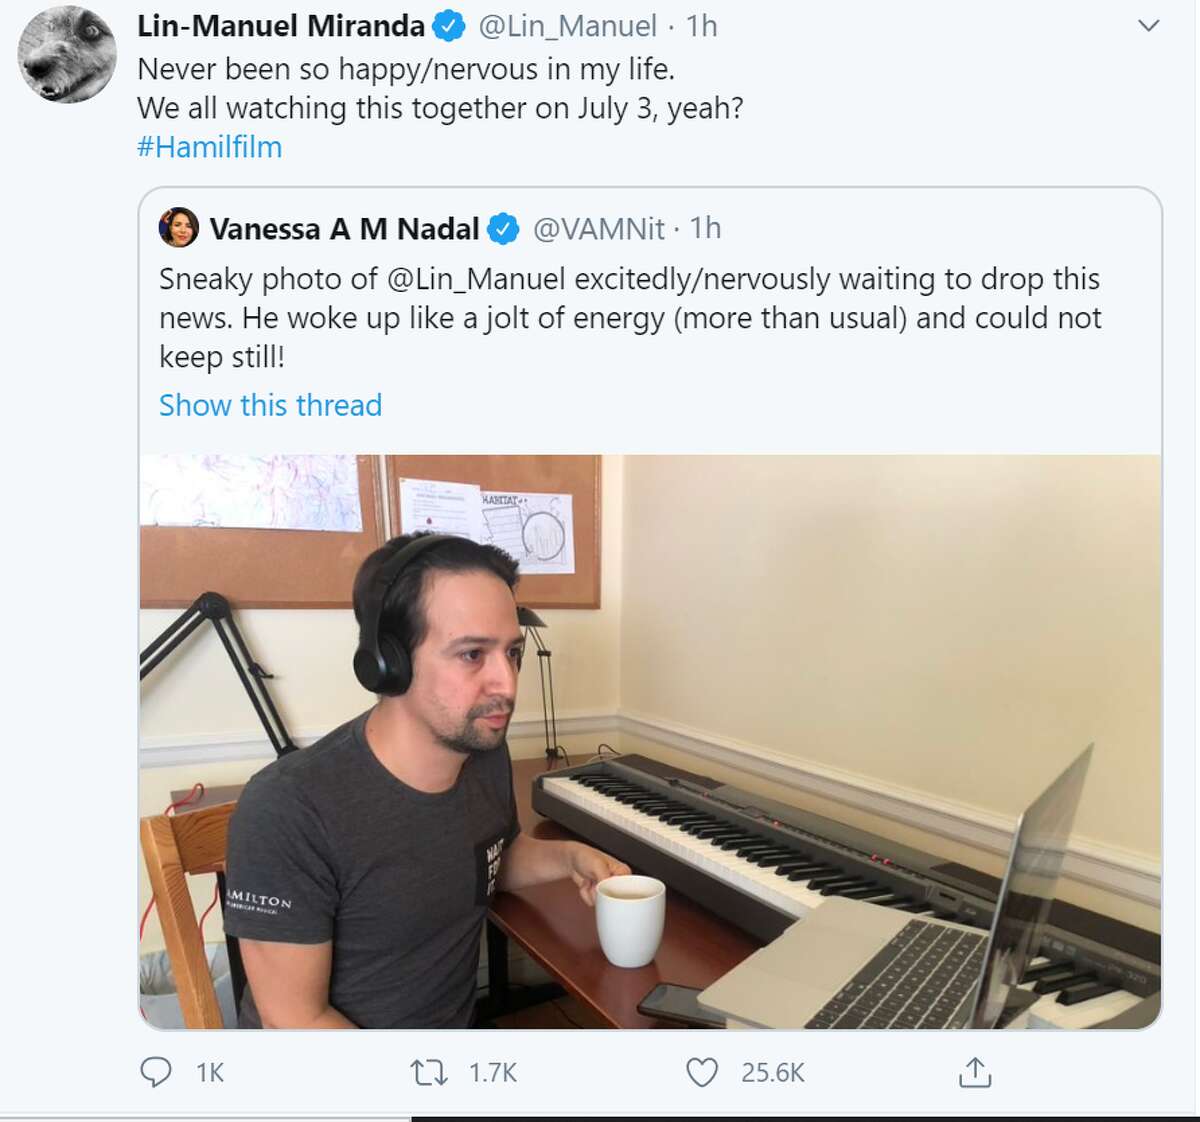 Vanessa Nadal, Lin-Manuel Miranda's wife, shared a photo of the multi-talented actor and musician waiting to share the news about "Hamilton."